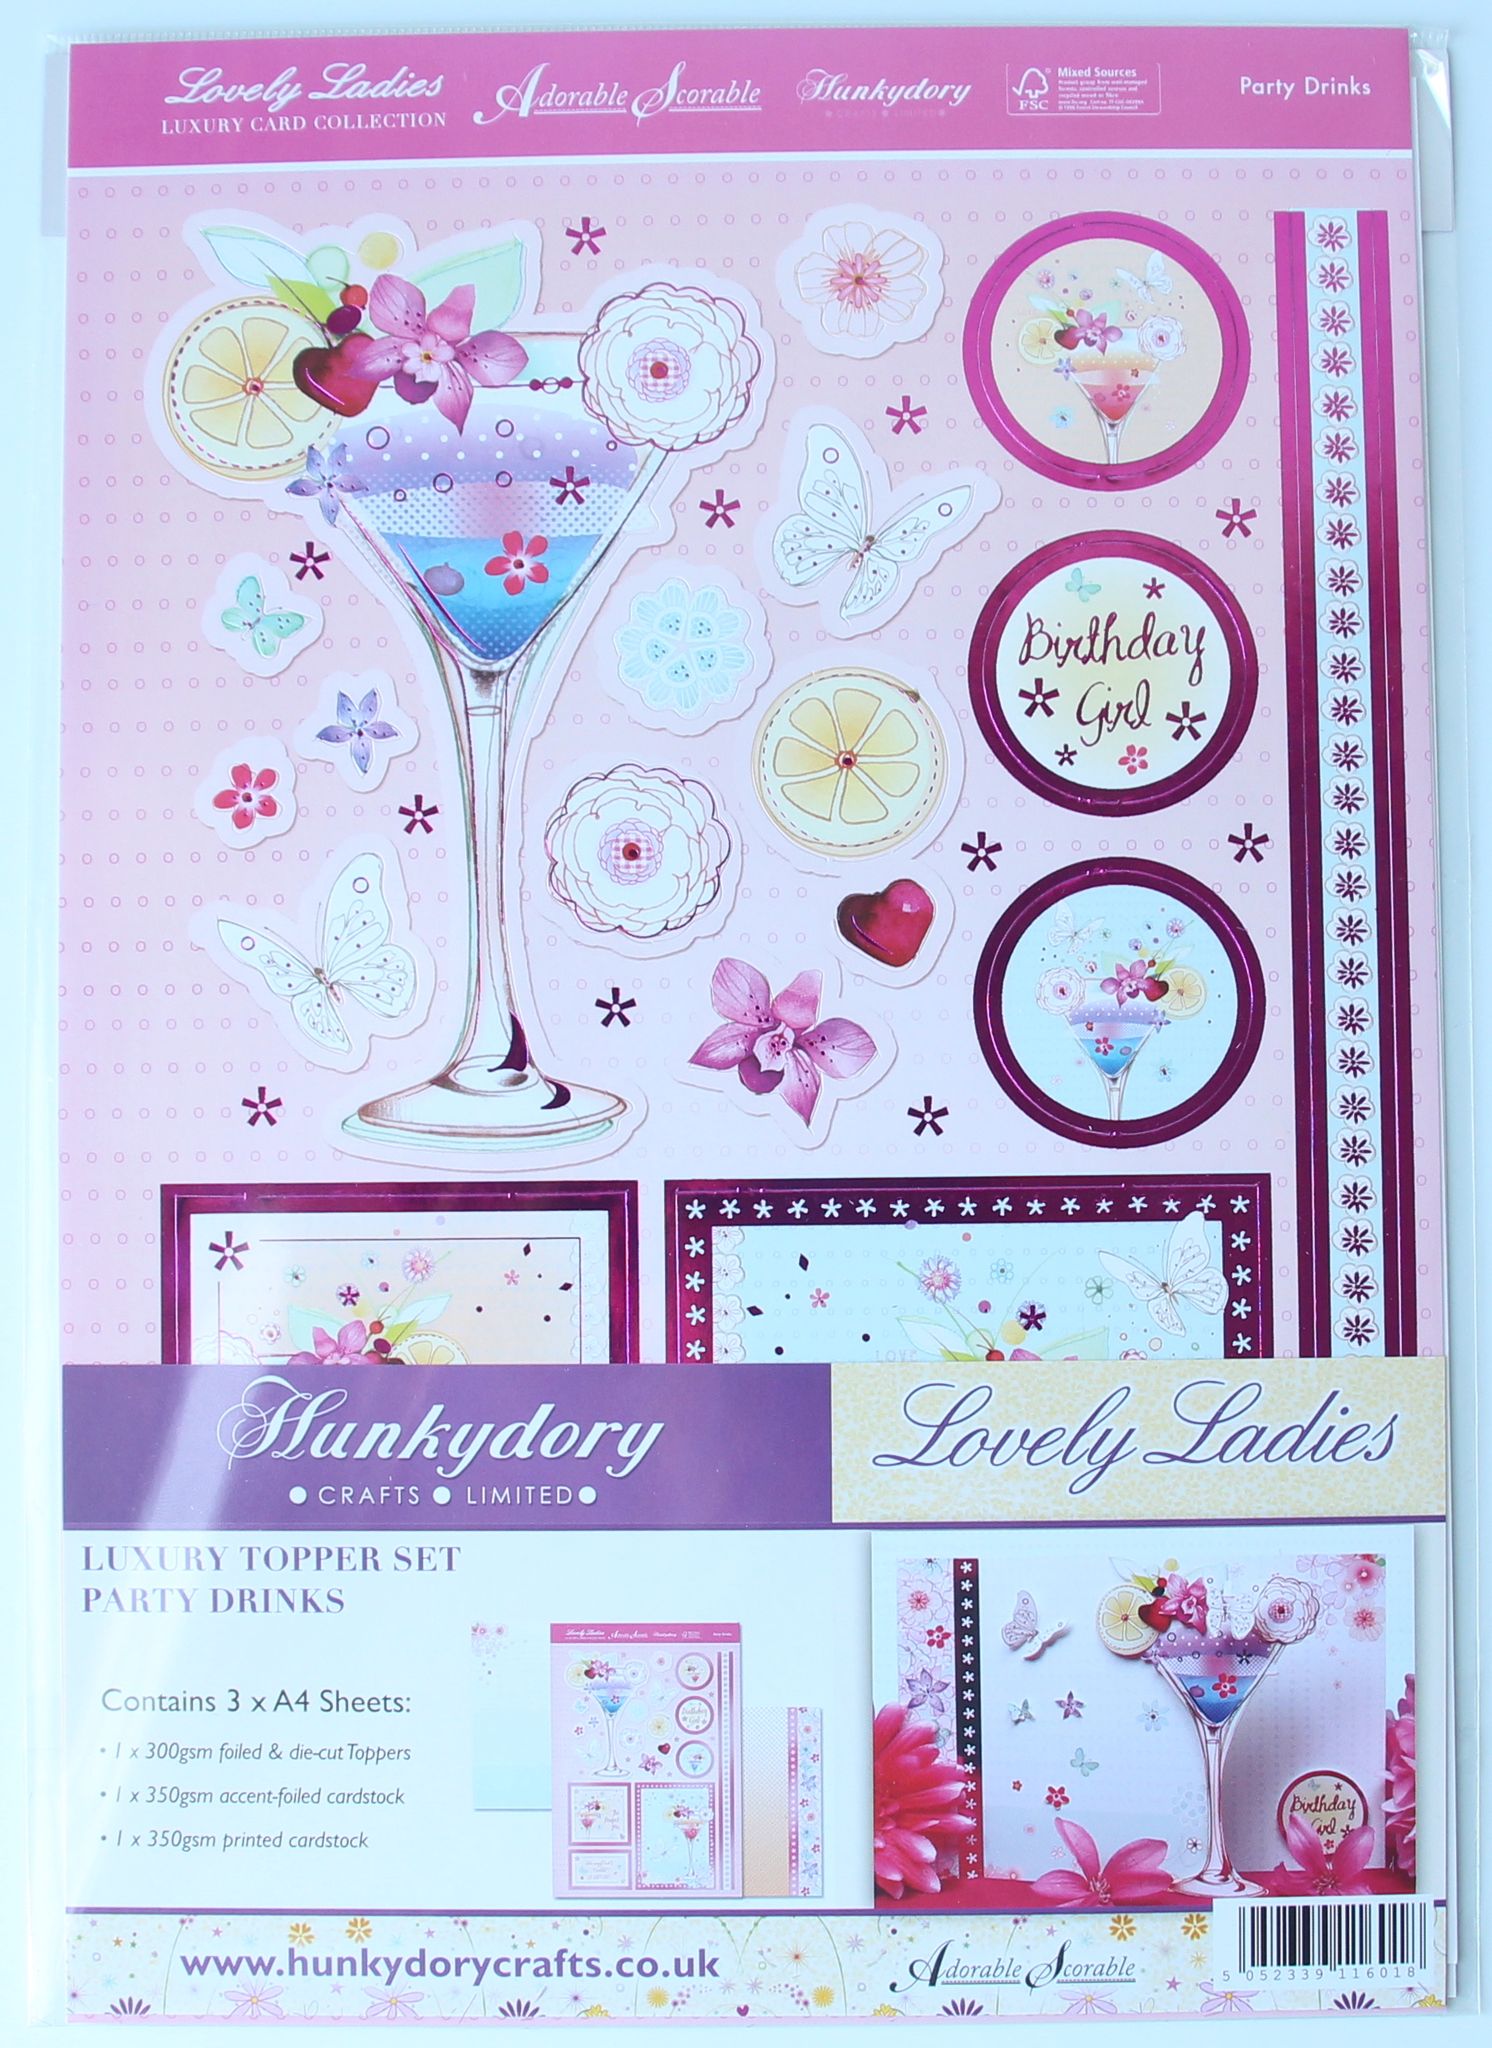 Lovely Ladies Luxury Topper Sets - Party Drinks